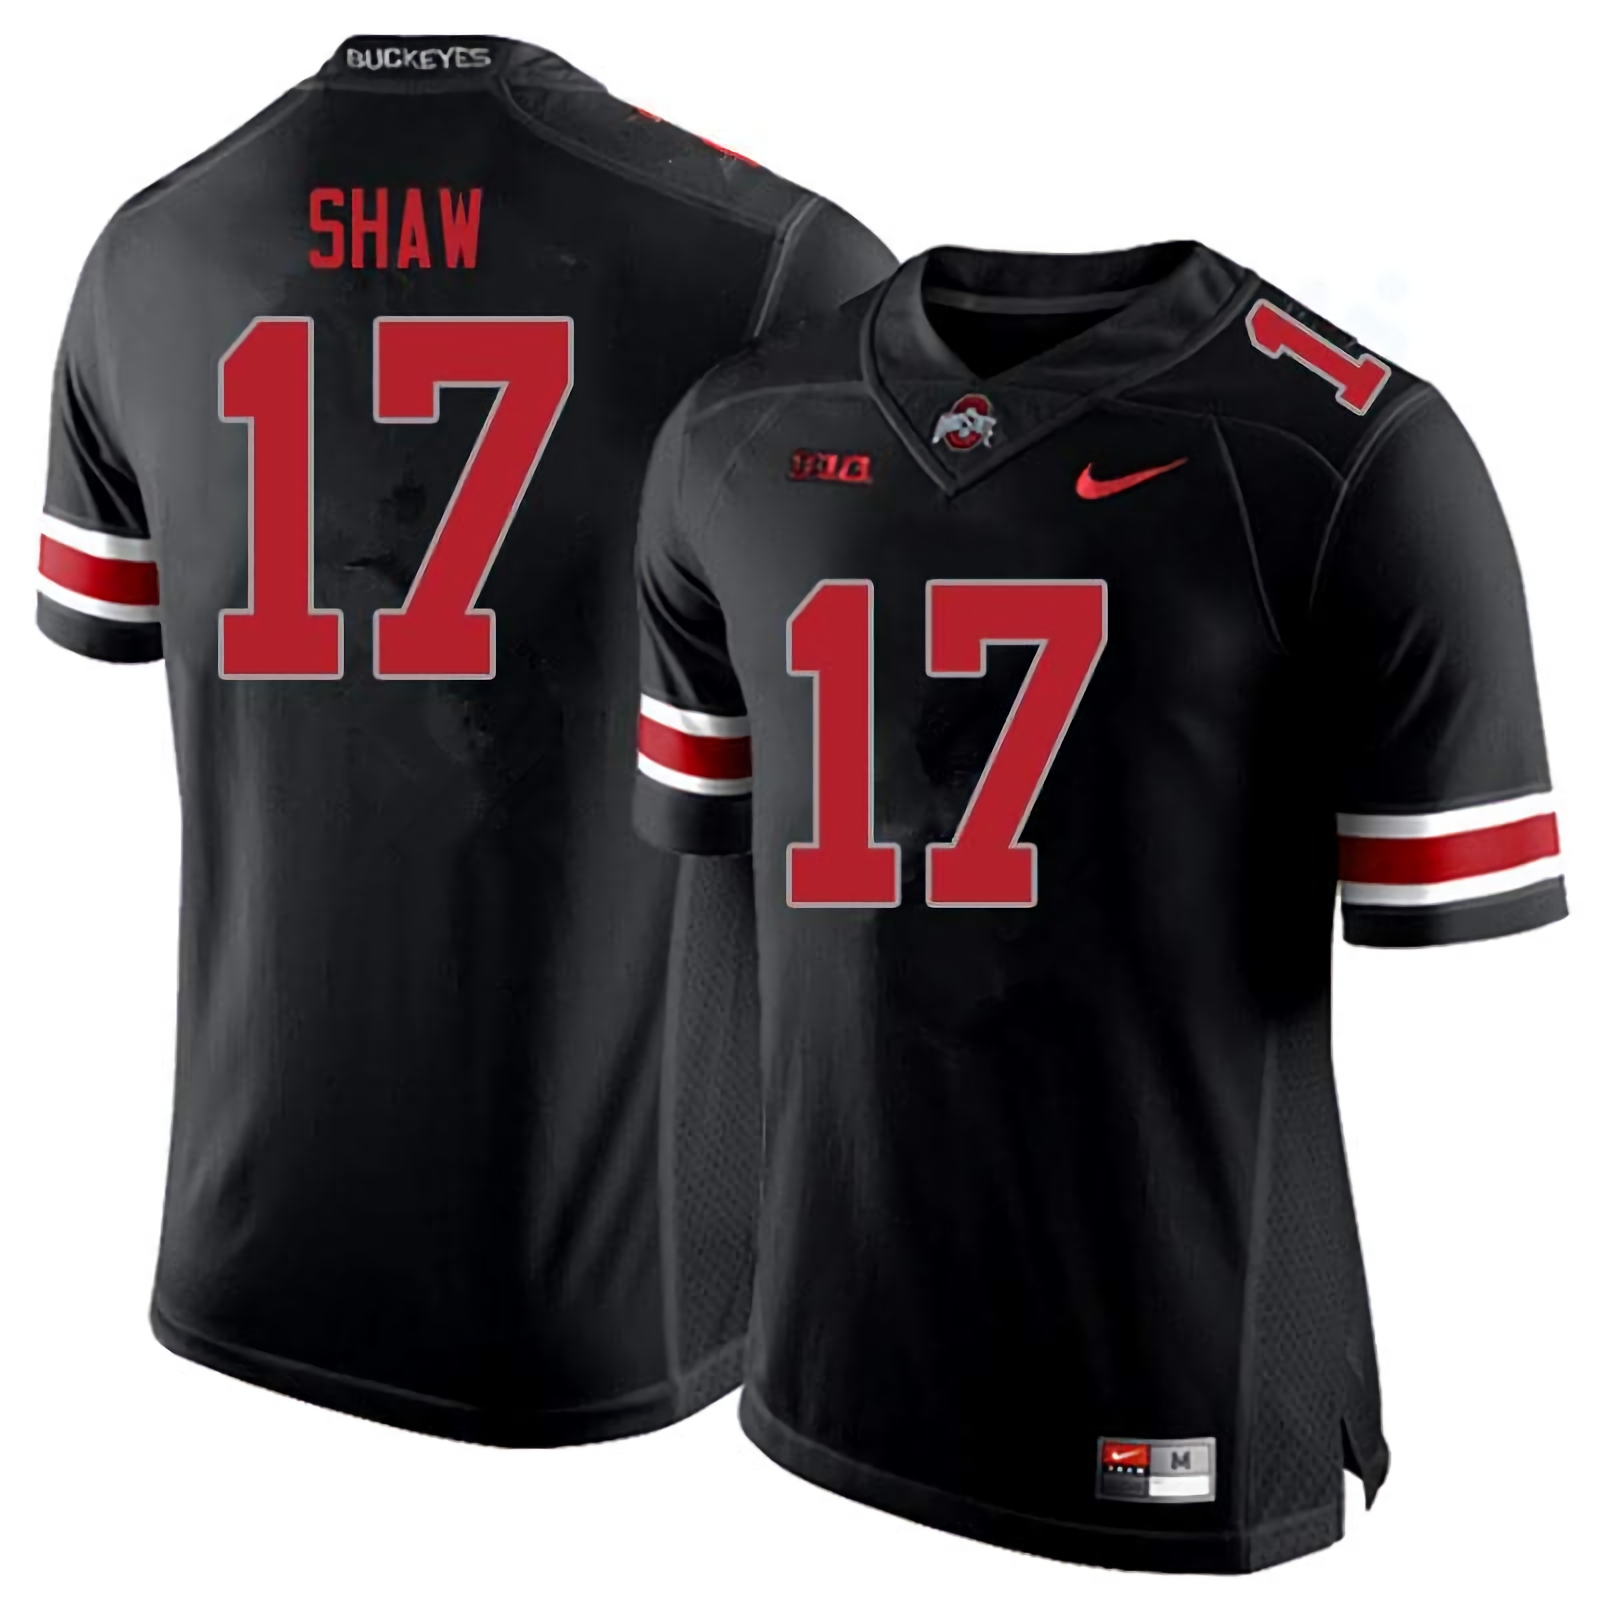 Bryson Shaw Ohio State Buckeyes Men's NCAA #17 Nike Blackout College Stitched Football Jersey CWO3156SL